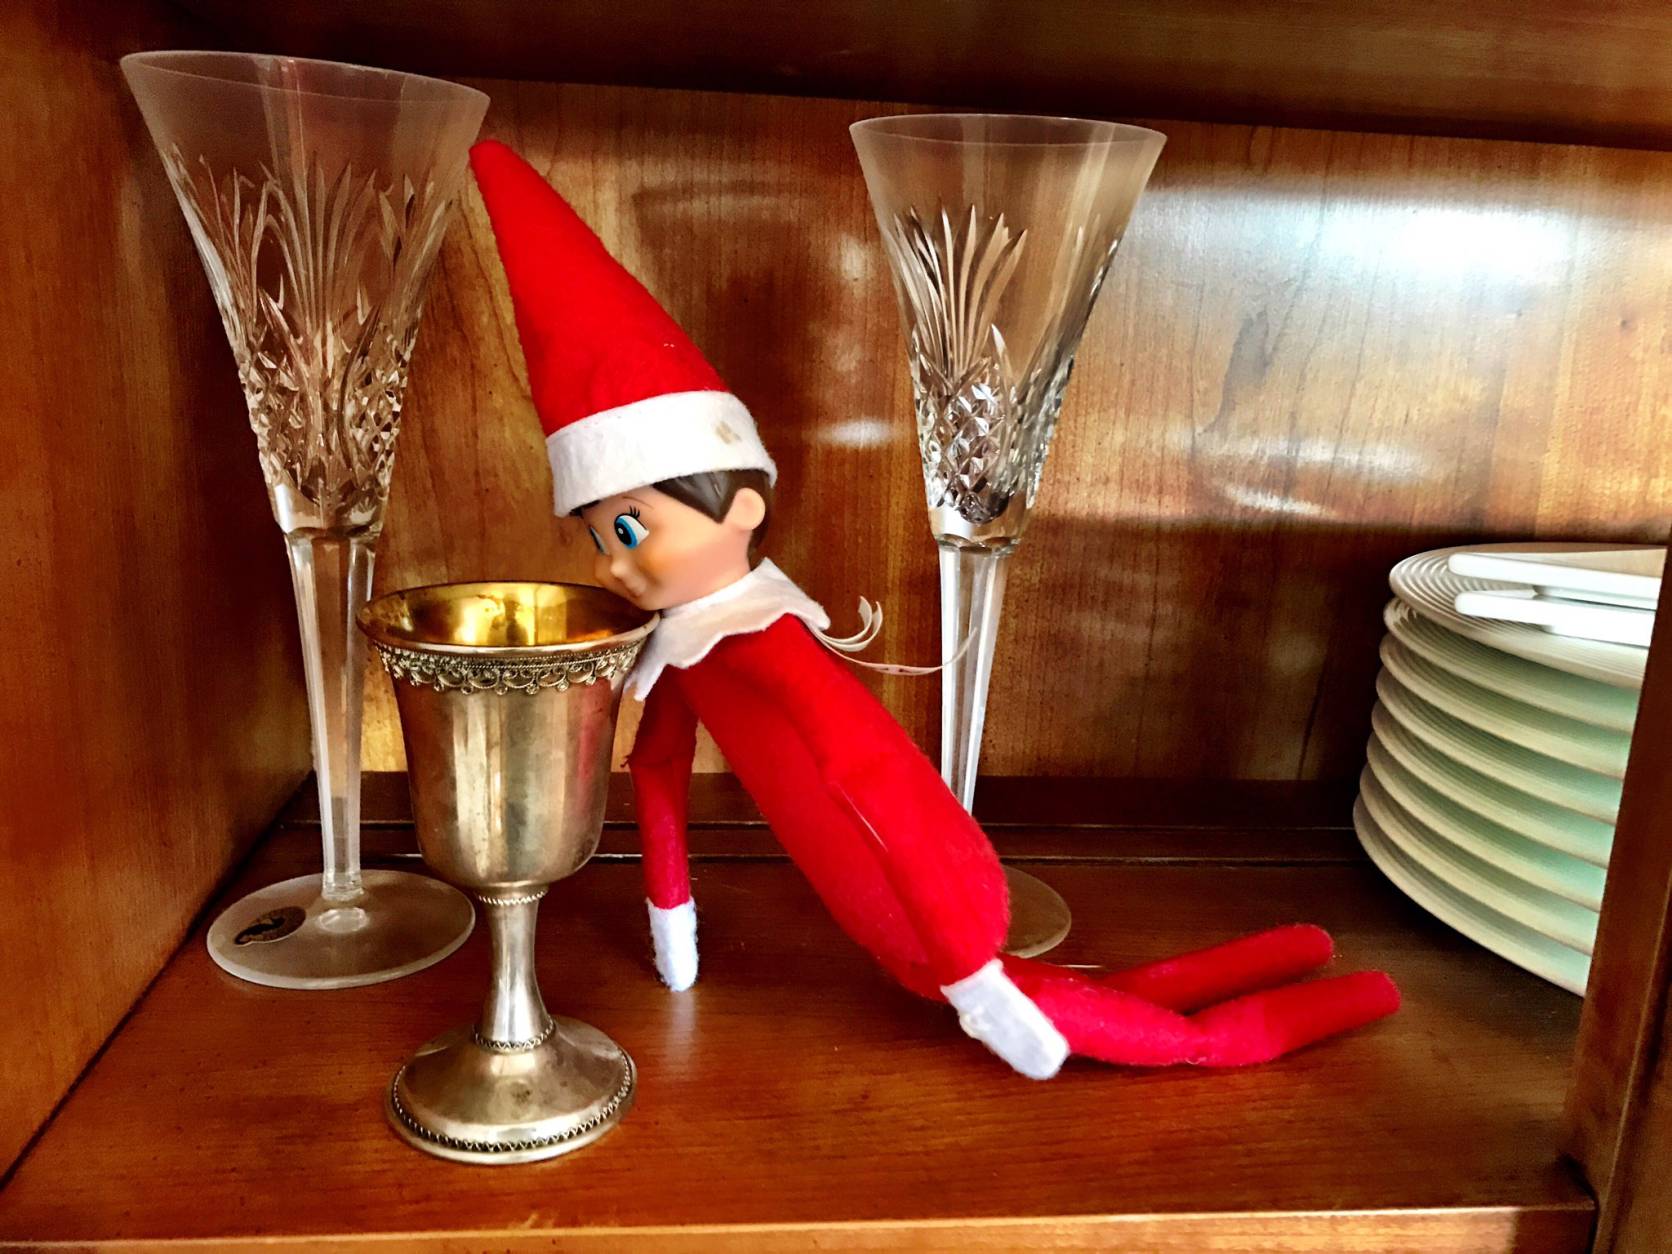 Our #elfonashelf was found sipping from the ✡️kiddish cup, says WTOP's Neal Augenstein. (WTOP/Neal Augenstein)